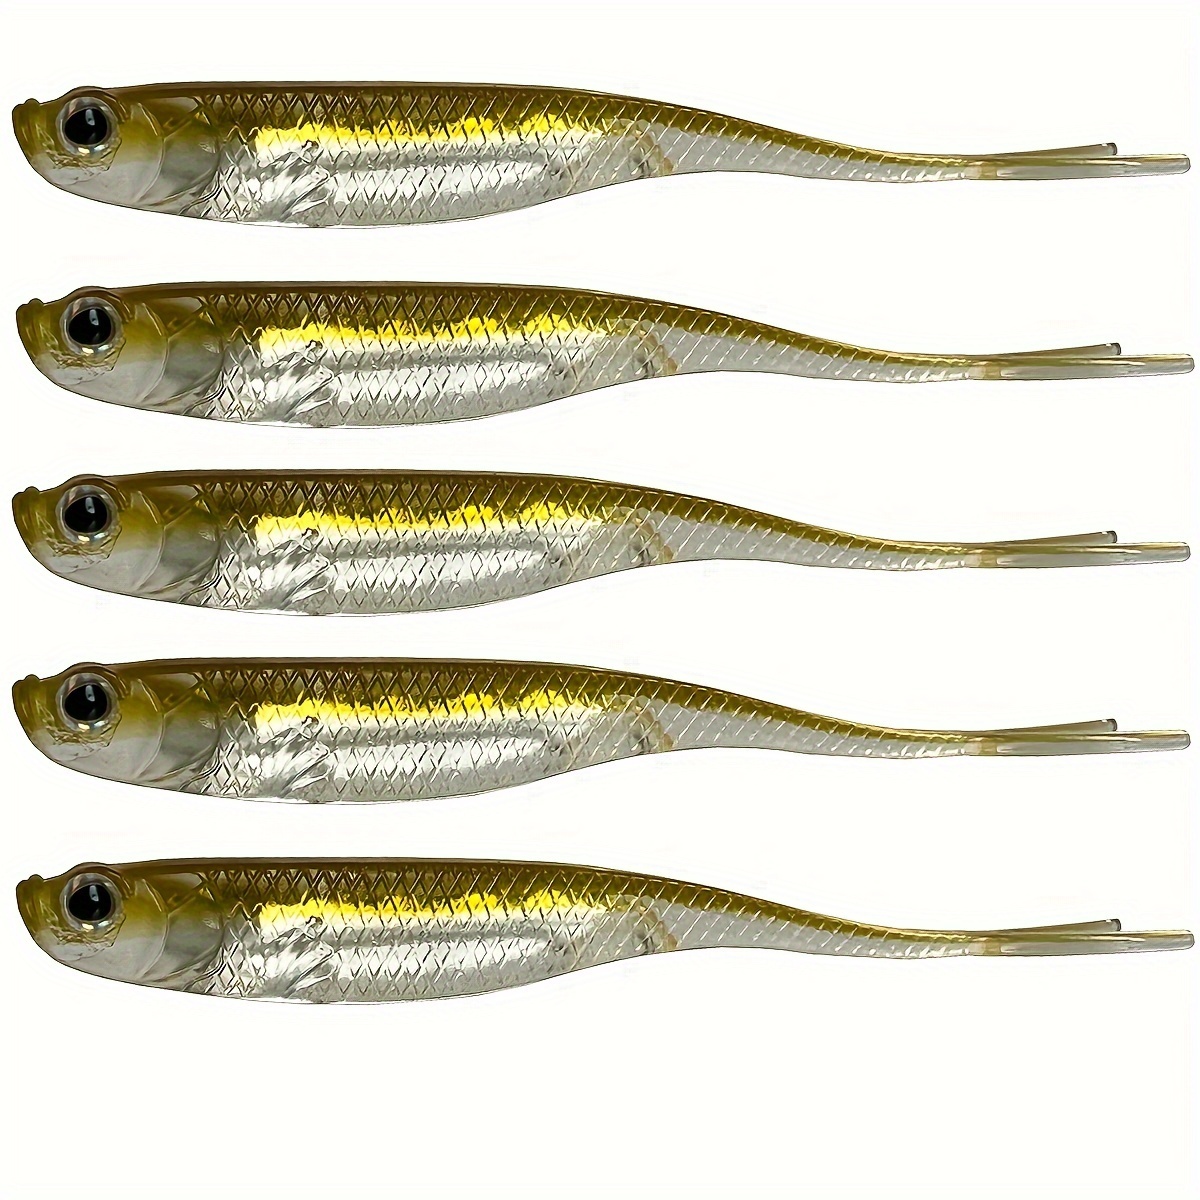 Funzhan Fishing Soft Lures for Bass Artificial Plastic Baits Paddle Tail  Swimbaits Creature Shad Proven Colors Natural Oils Portable Box for Crappie